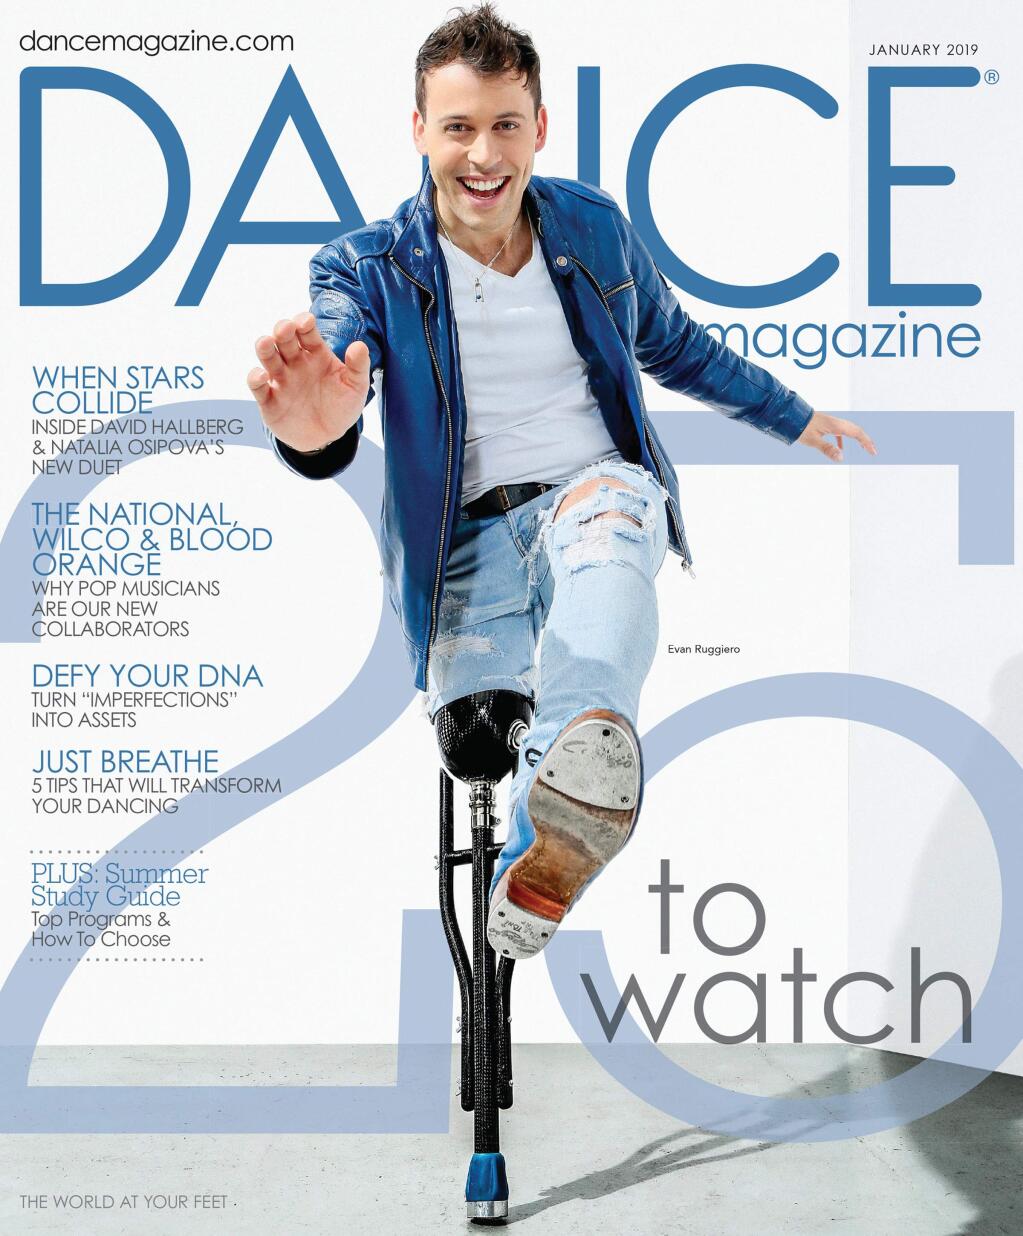 Evan Ruggiero on the cover of Dance magazine (TRANSCENDENCE THEATER COMPANY)